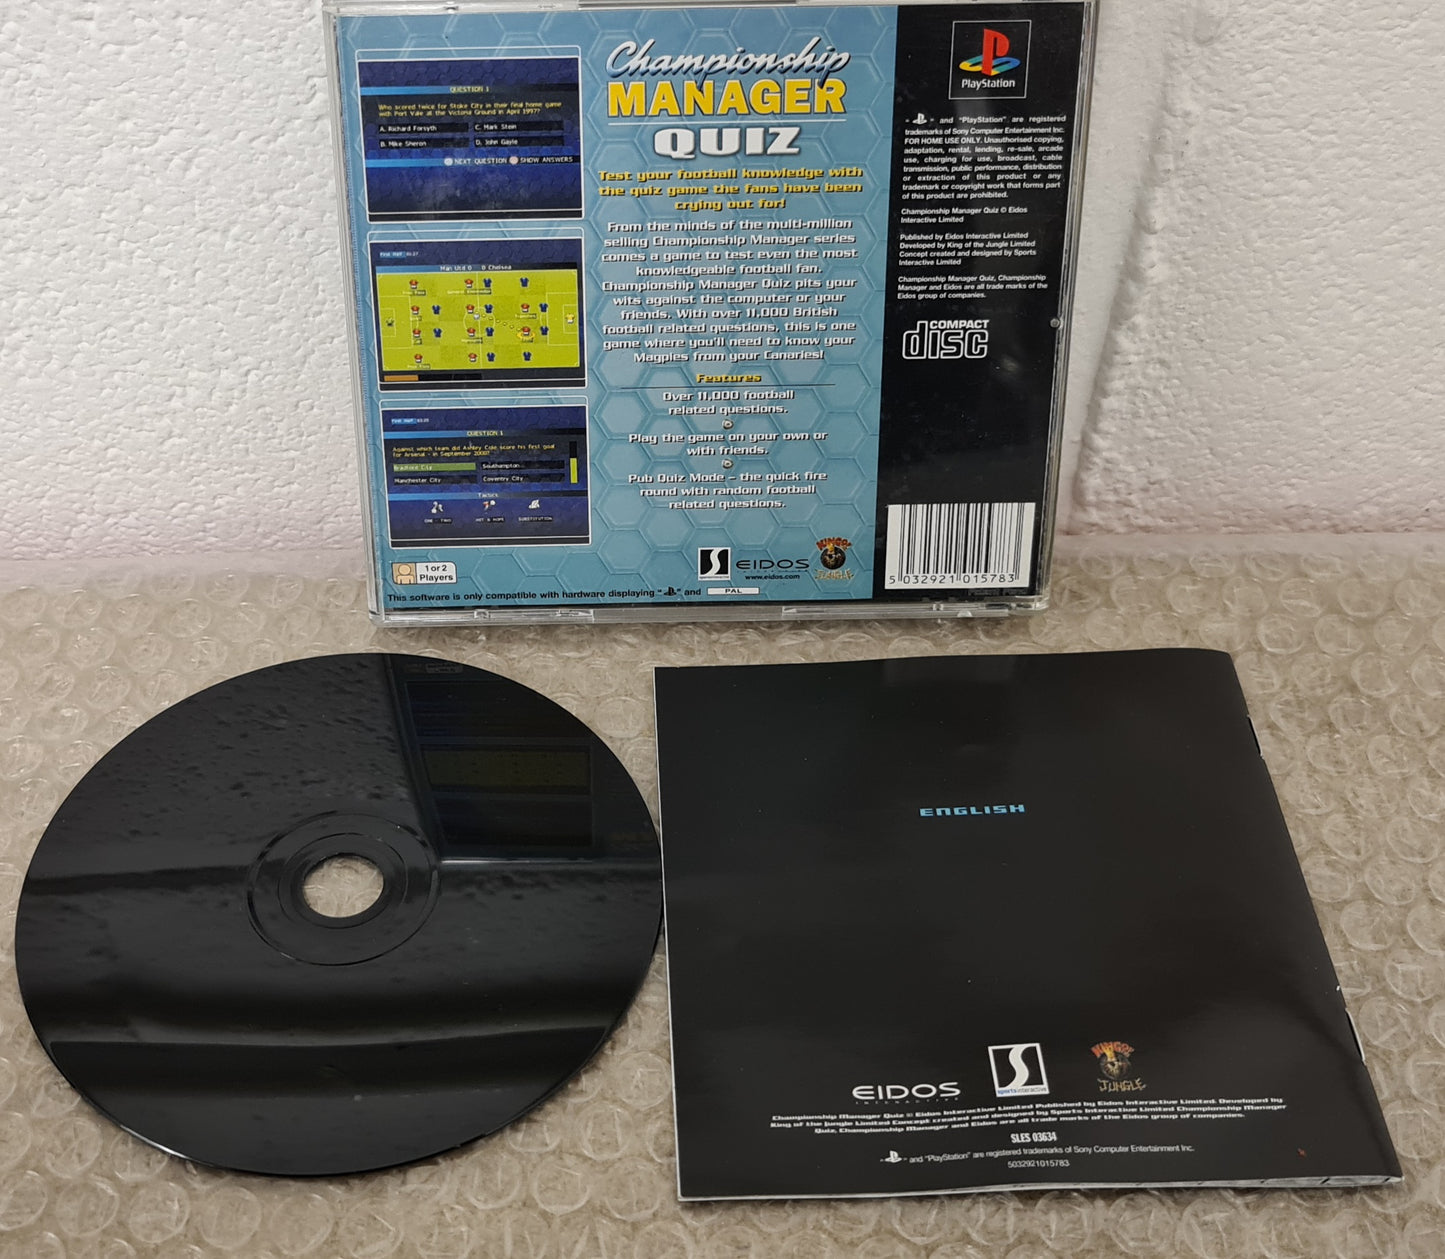 Championship Manager Quiz Sony Playstation 1 (PS1) Game